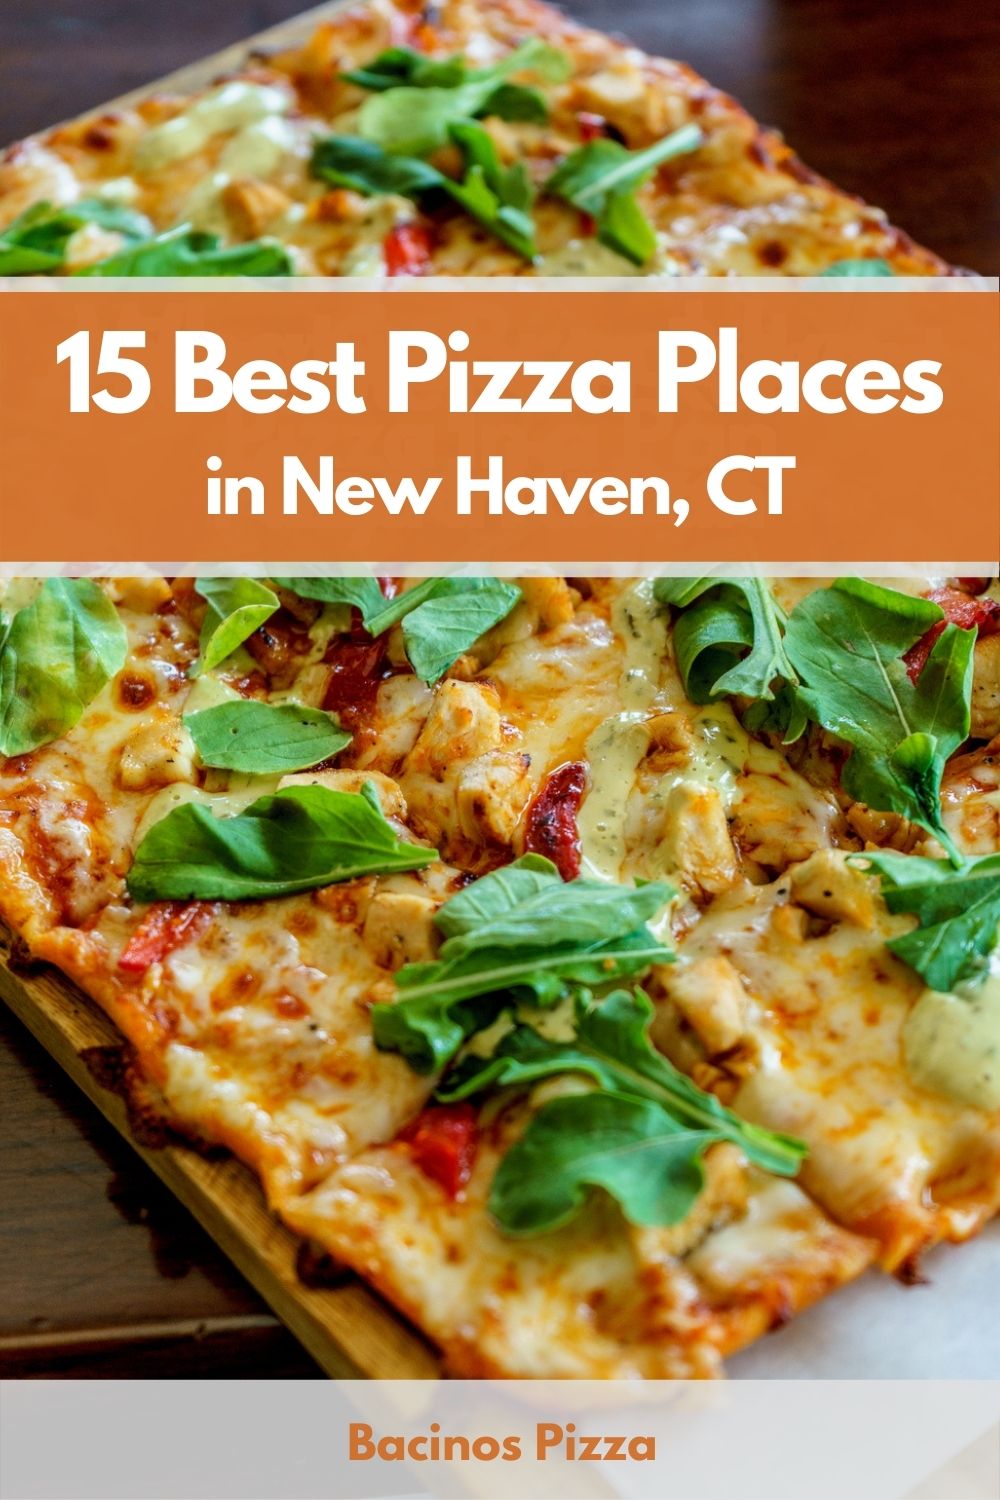 15 Best Pizza Places in New Haven, CT pin 2